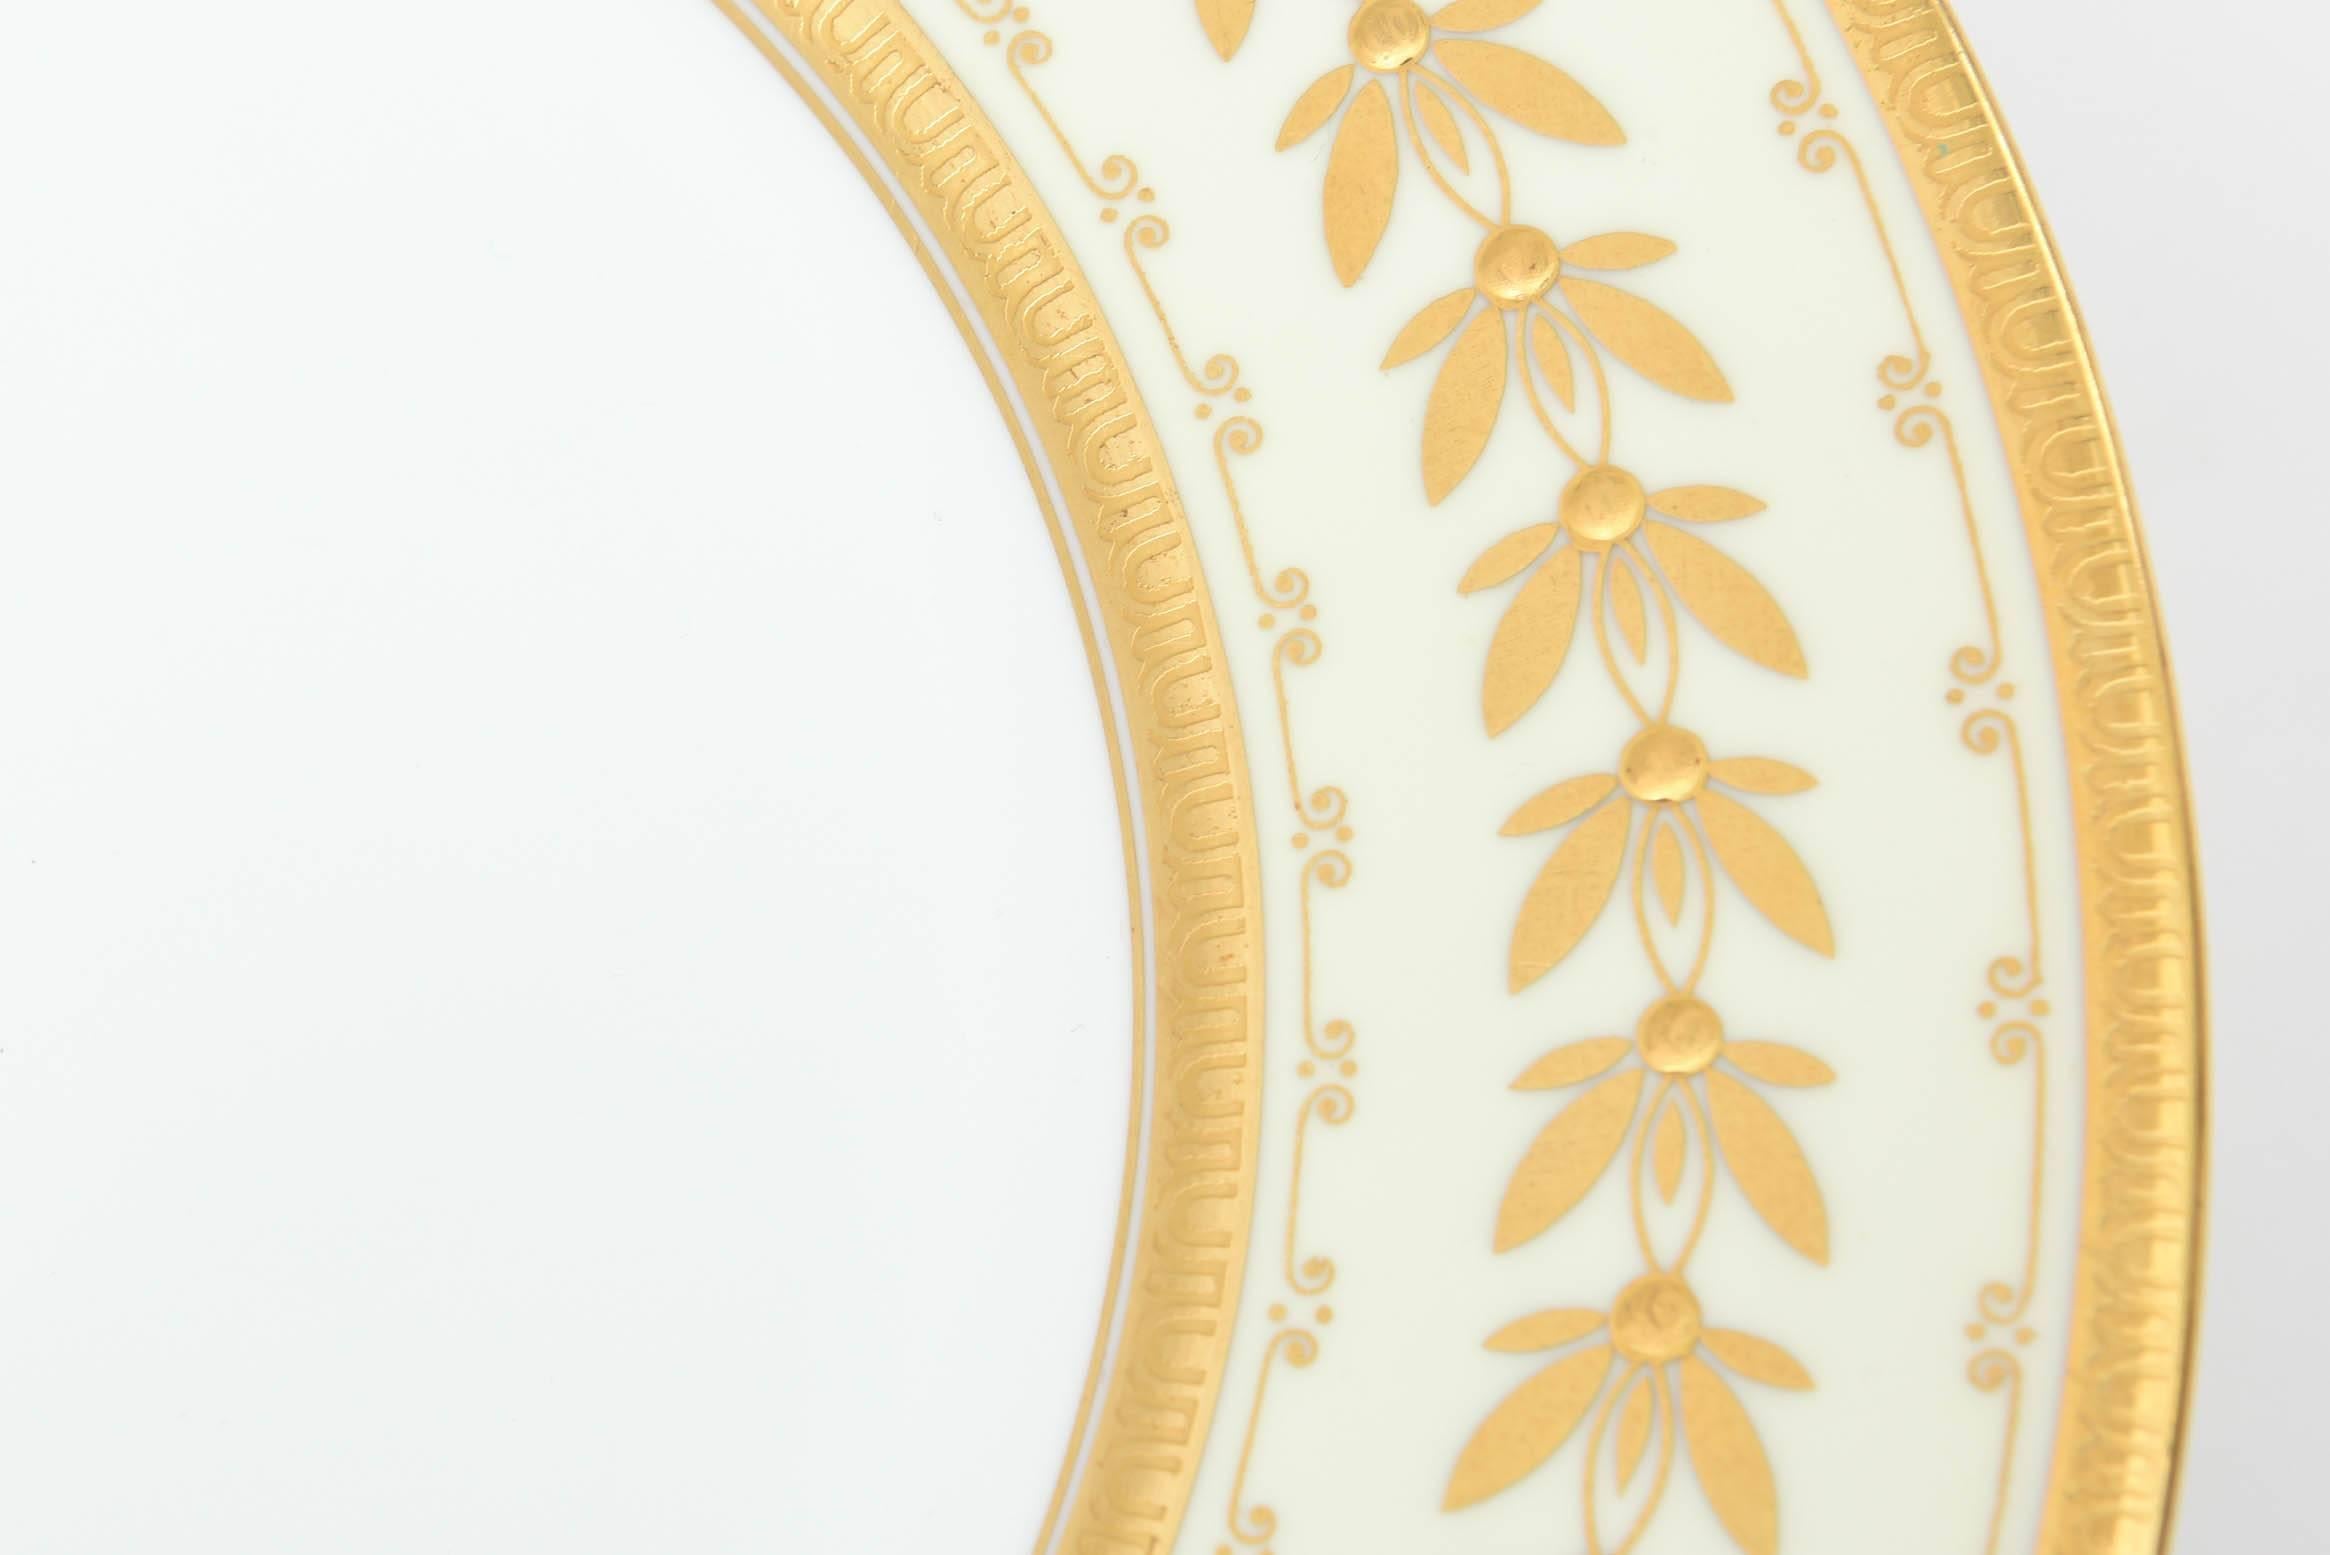 English 12 Dinner Plates, Custom for Tiffany, Antique with Raised Gold